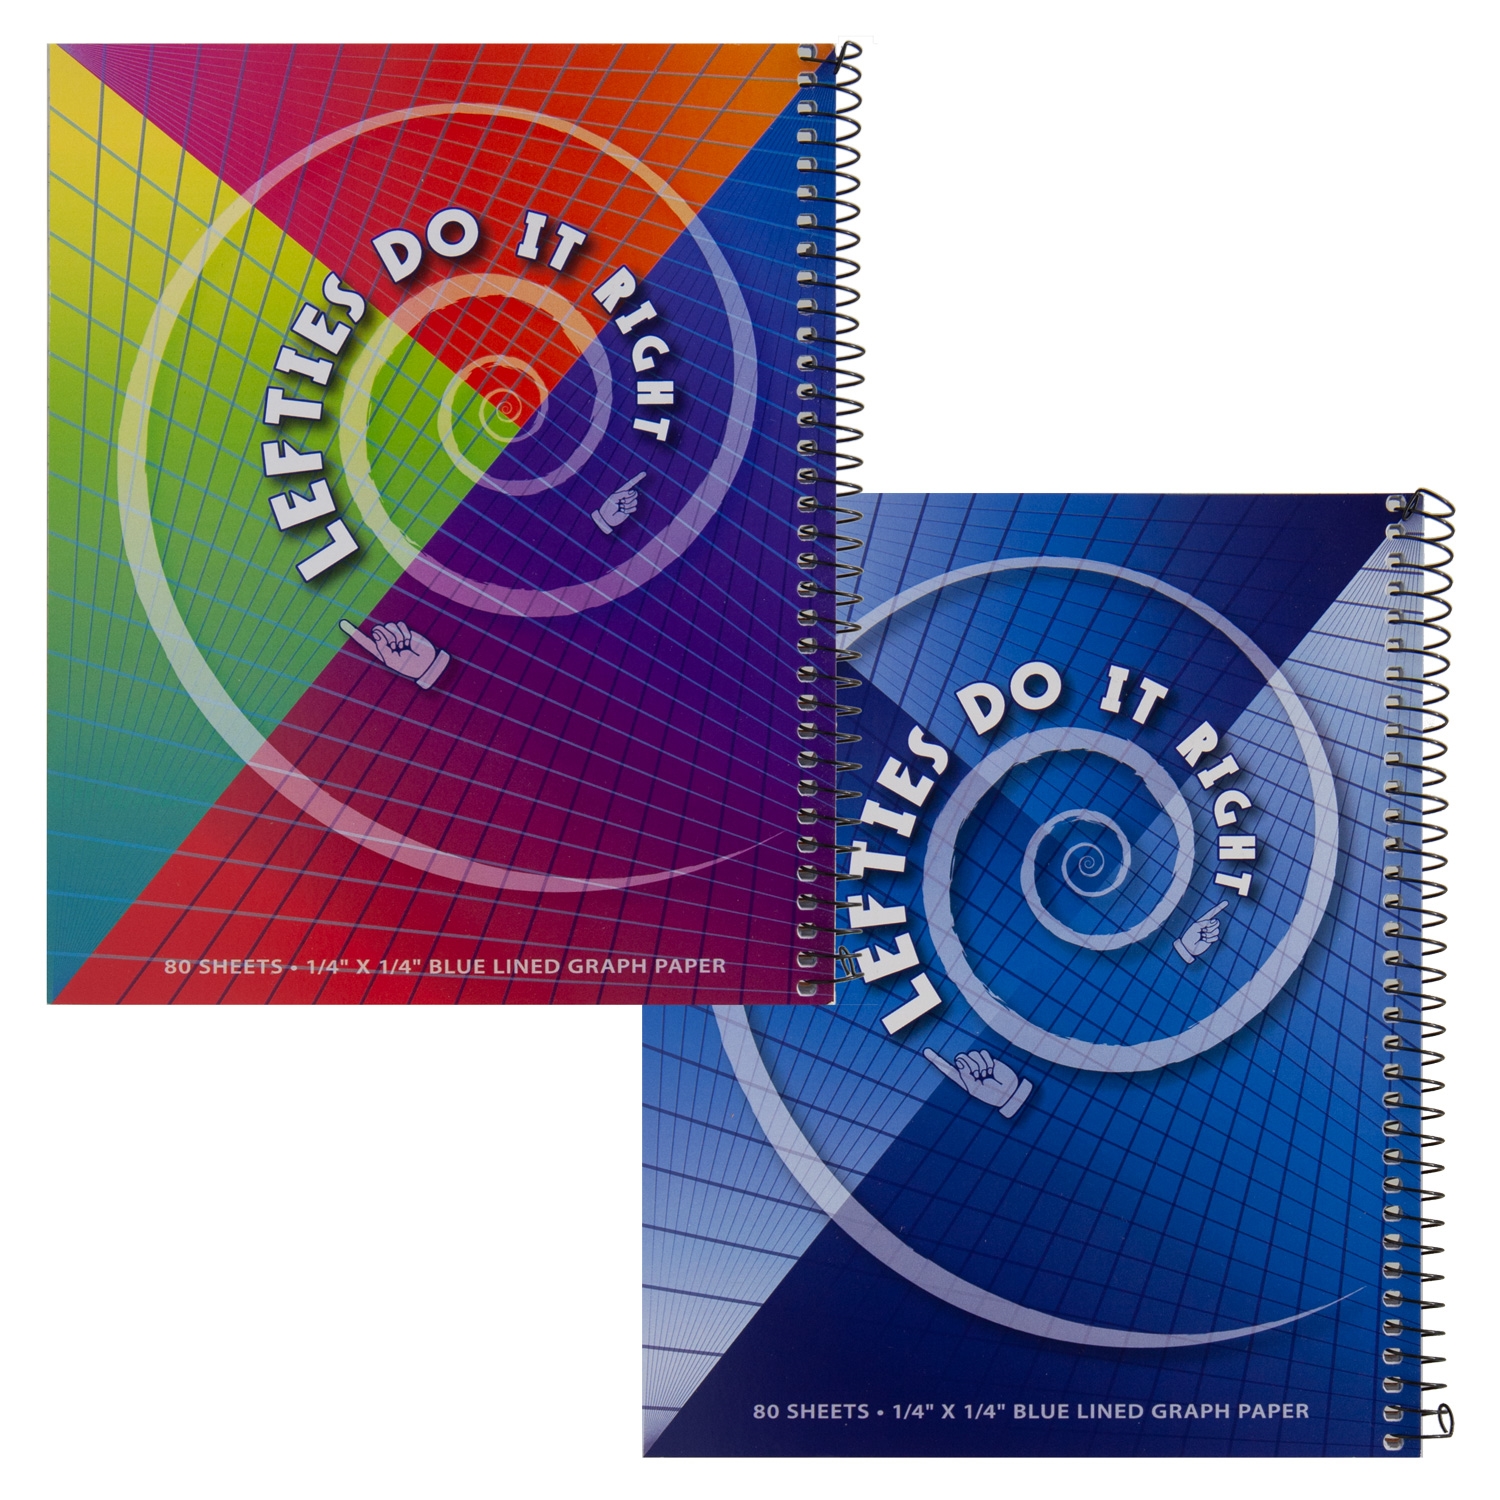 1 Subject Left Handed Assorted Colored Spiral Notebook